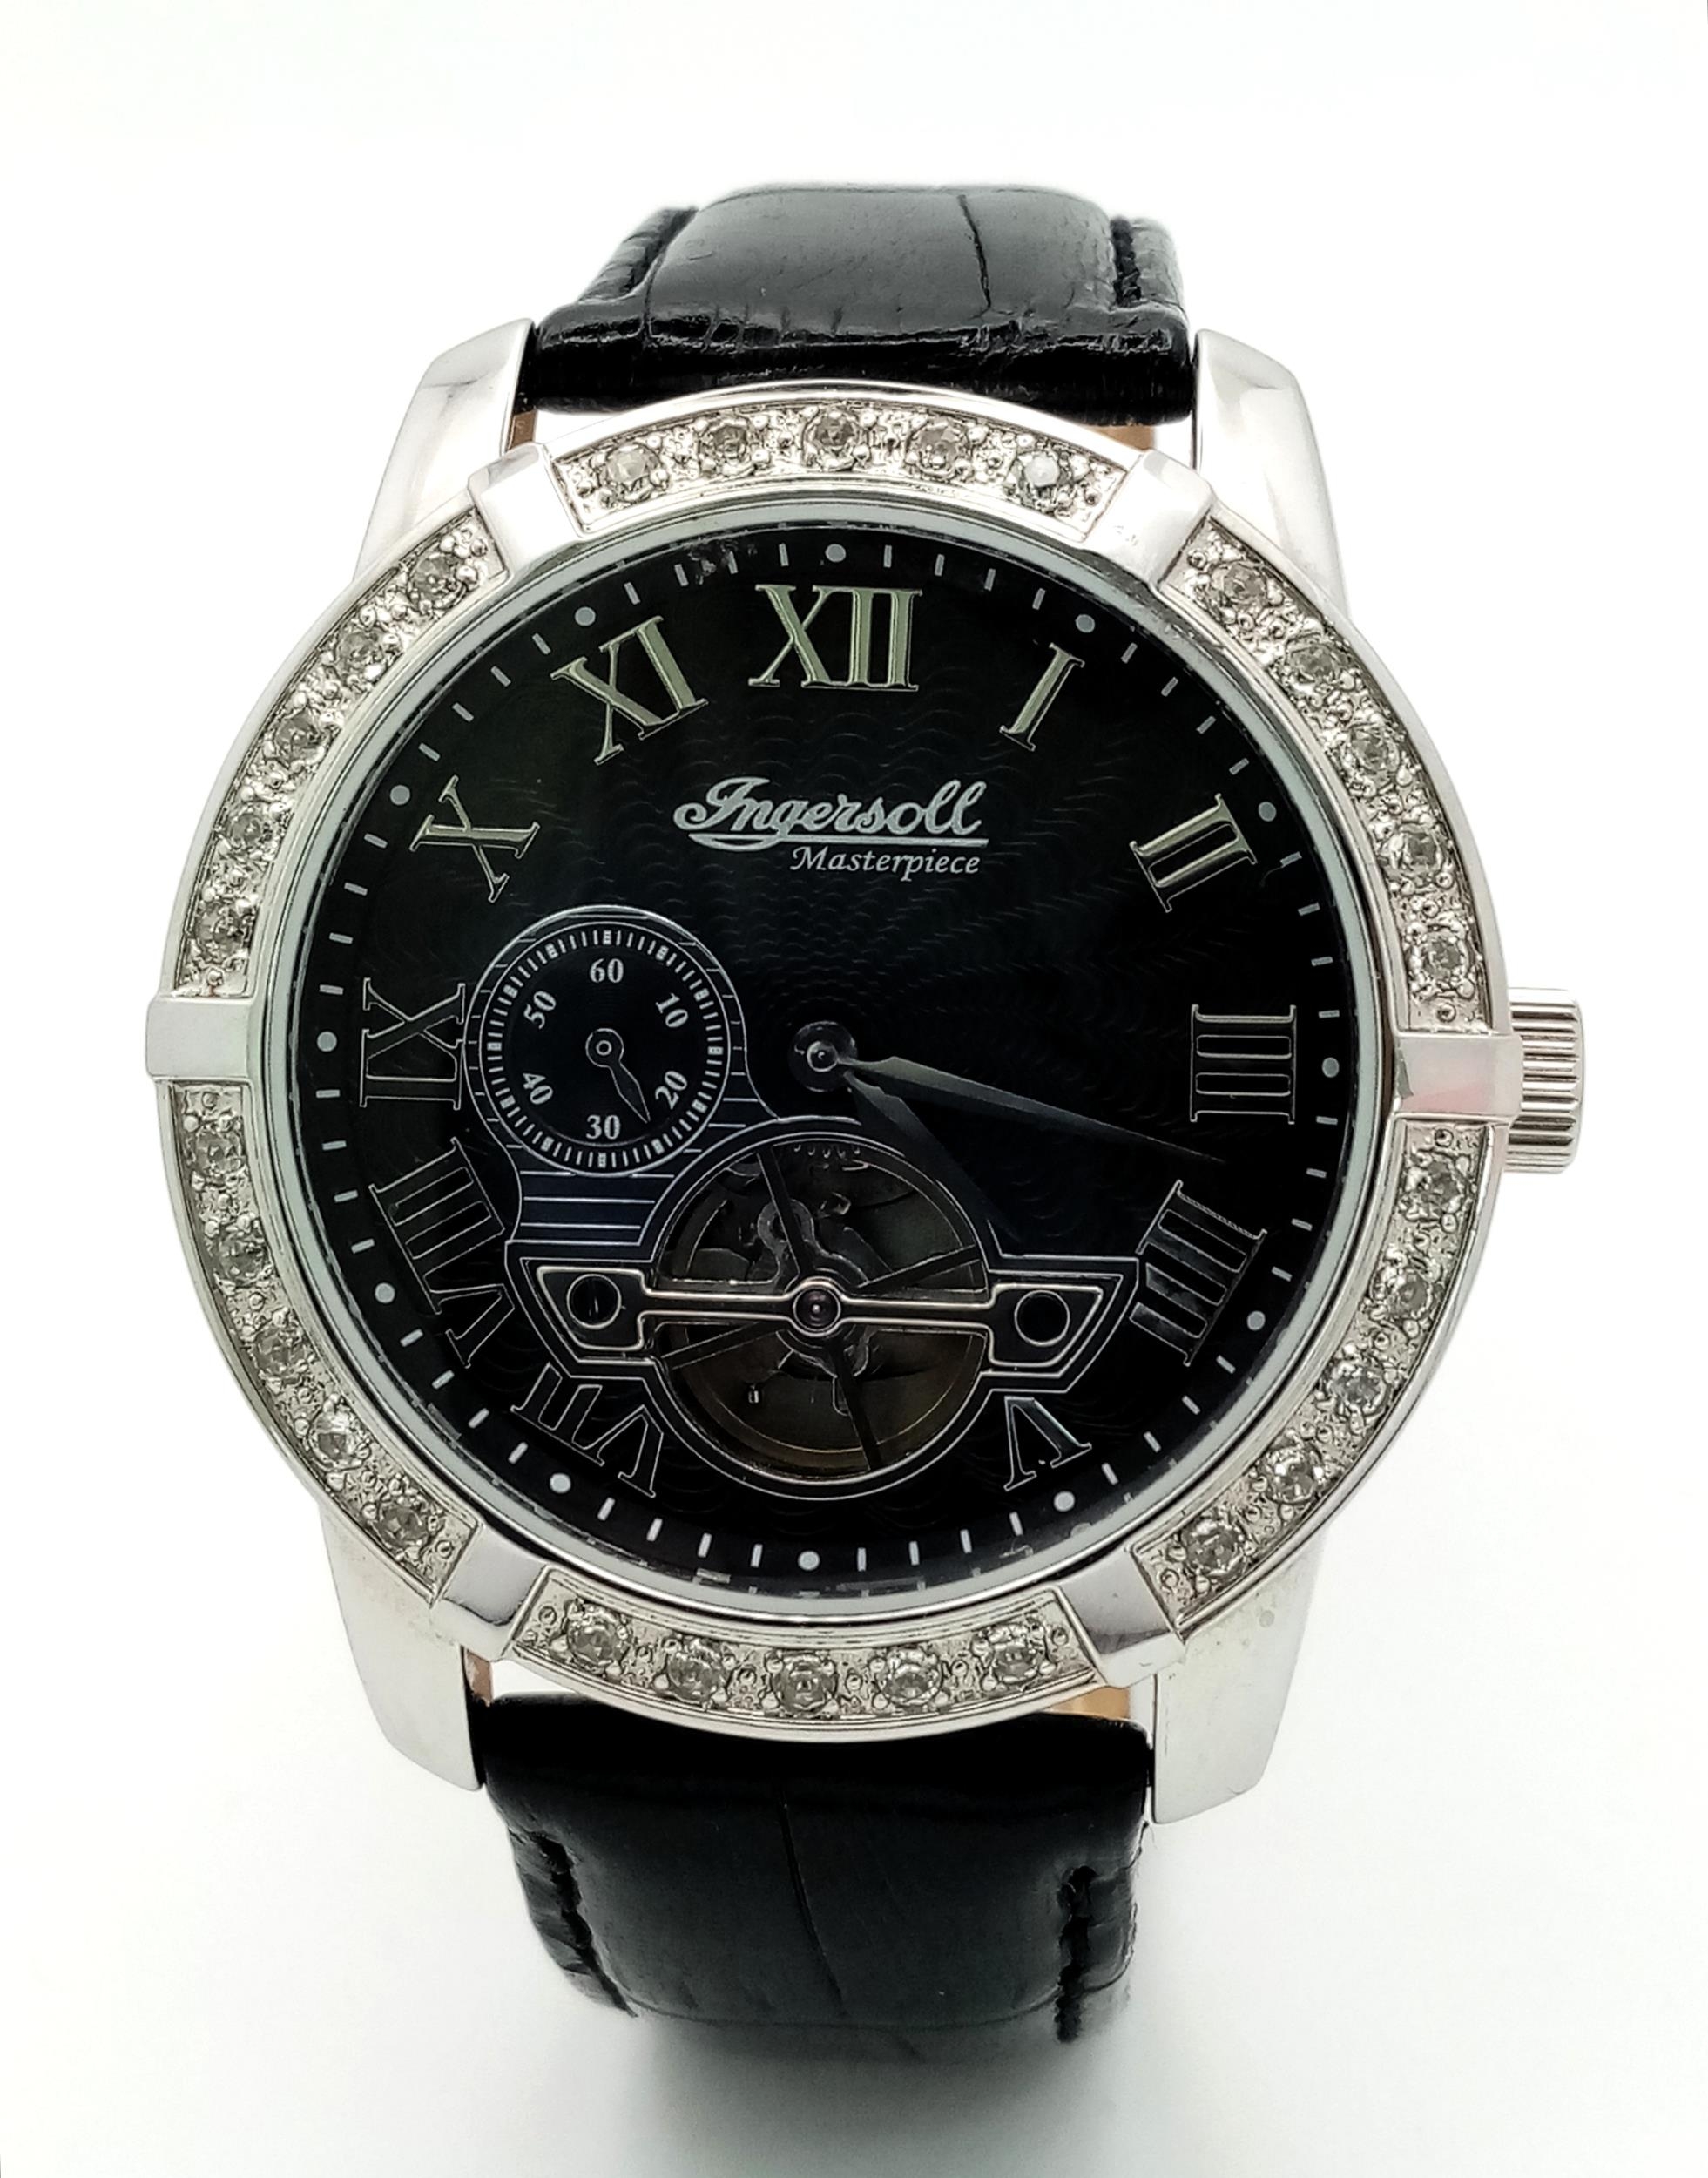 An Ingersoll Masterpiece Skeleton Gents Automatic Watch. Black leather strap. Stainless steel case - - Image 2 of 5